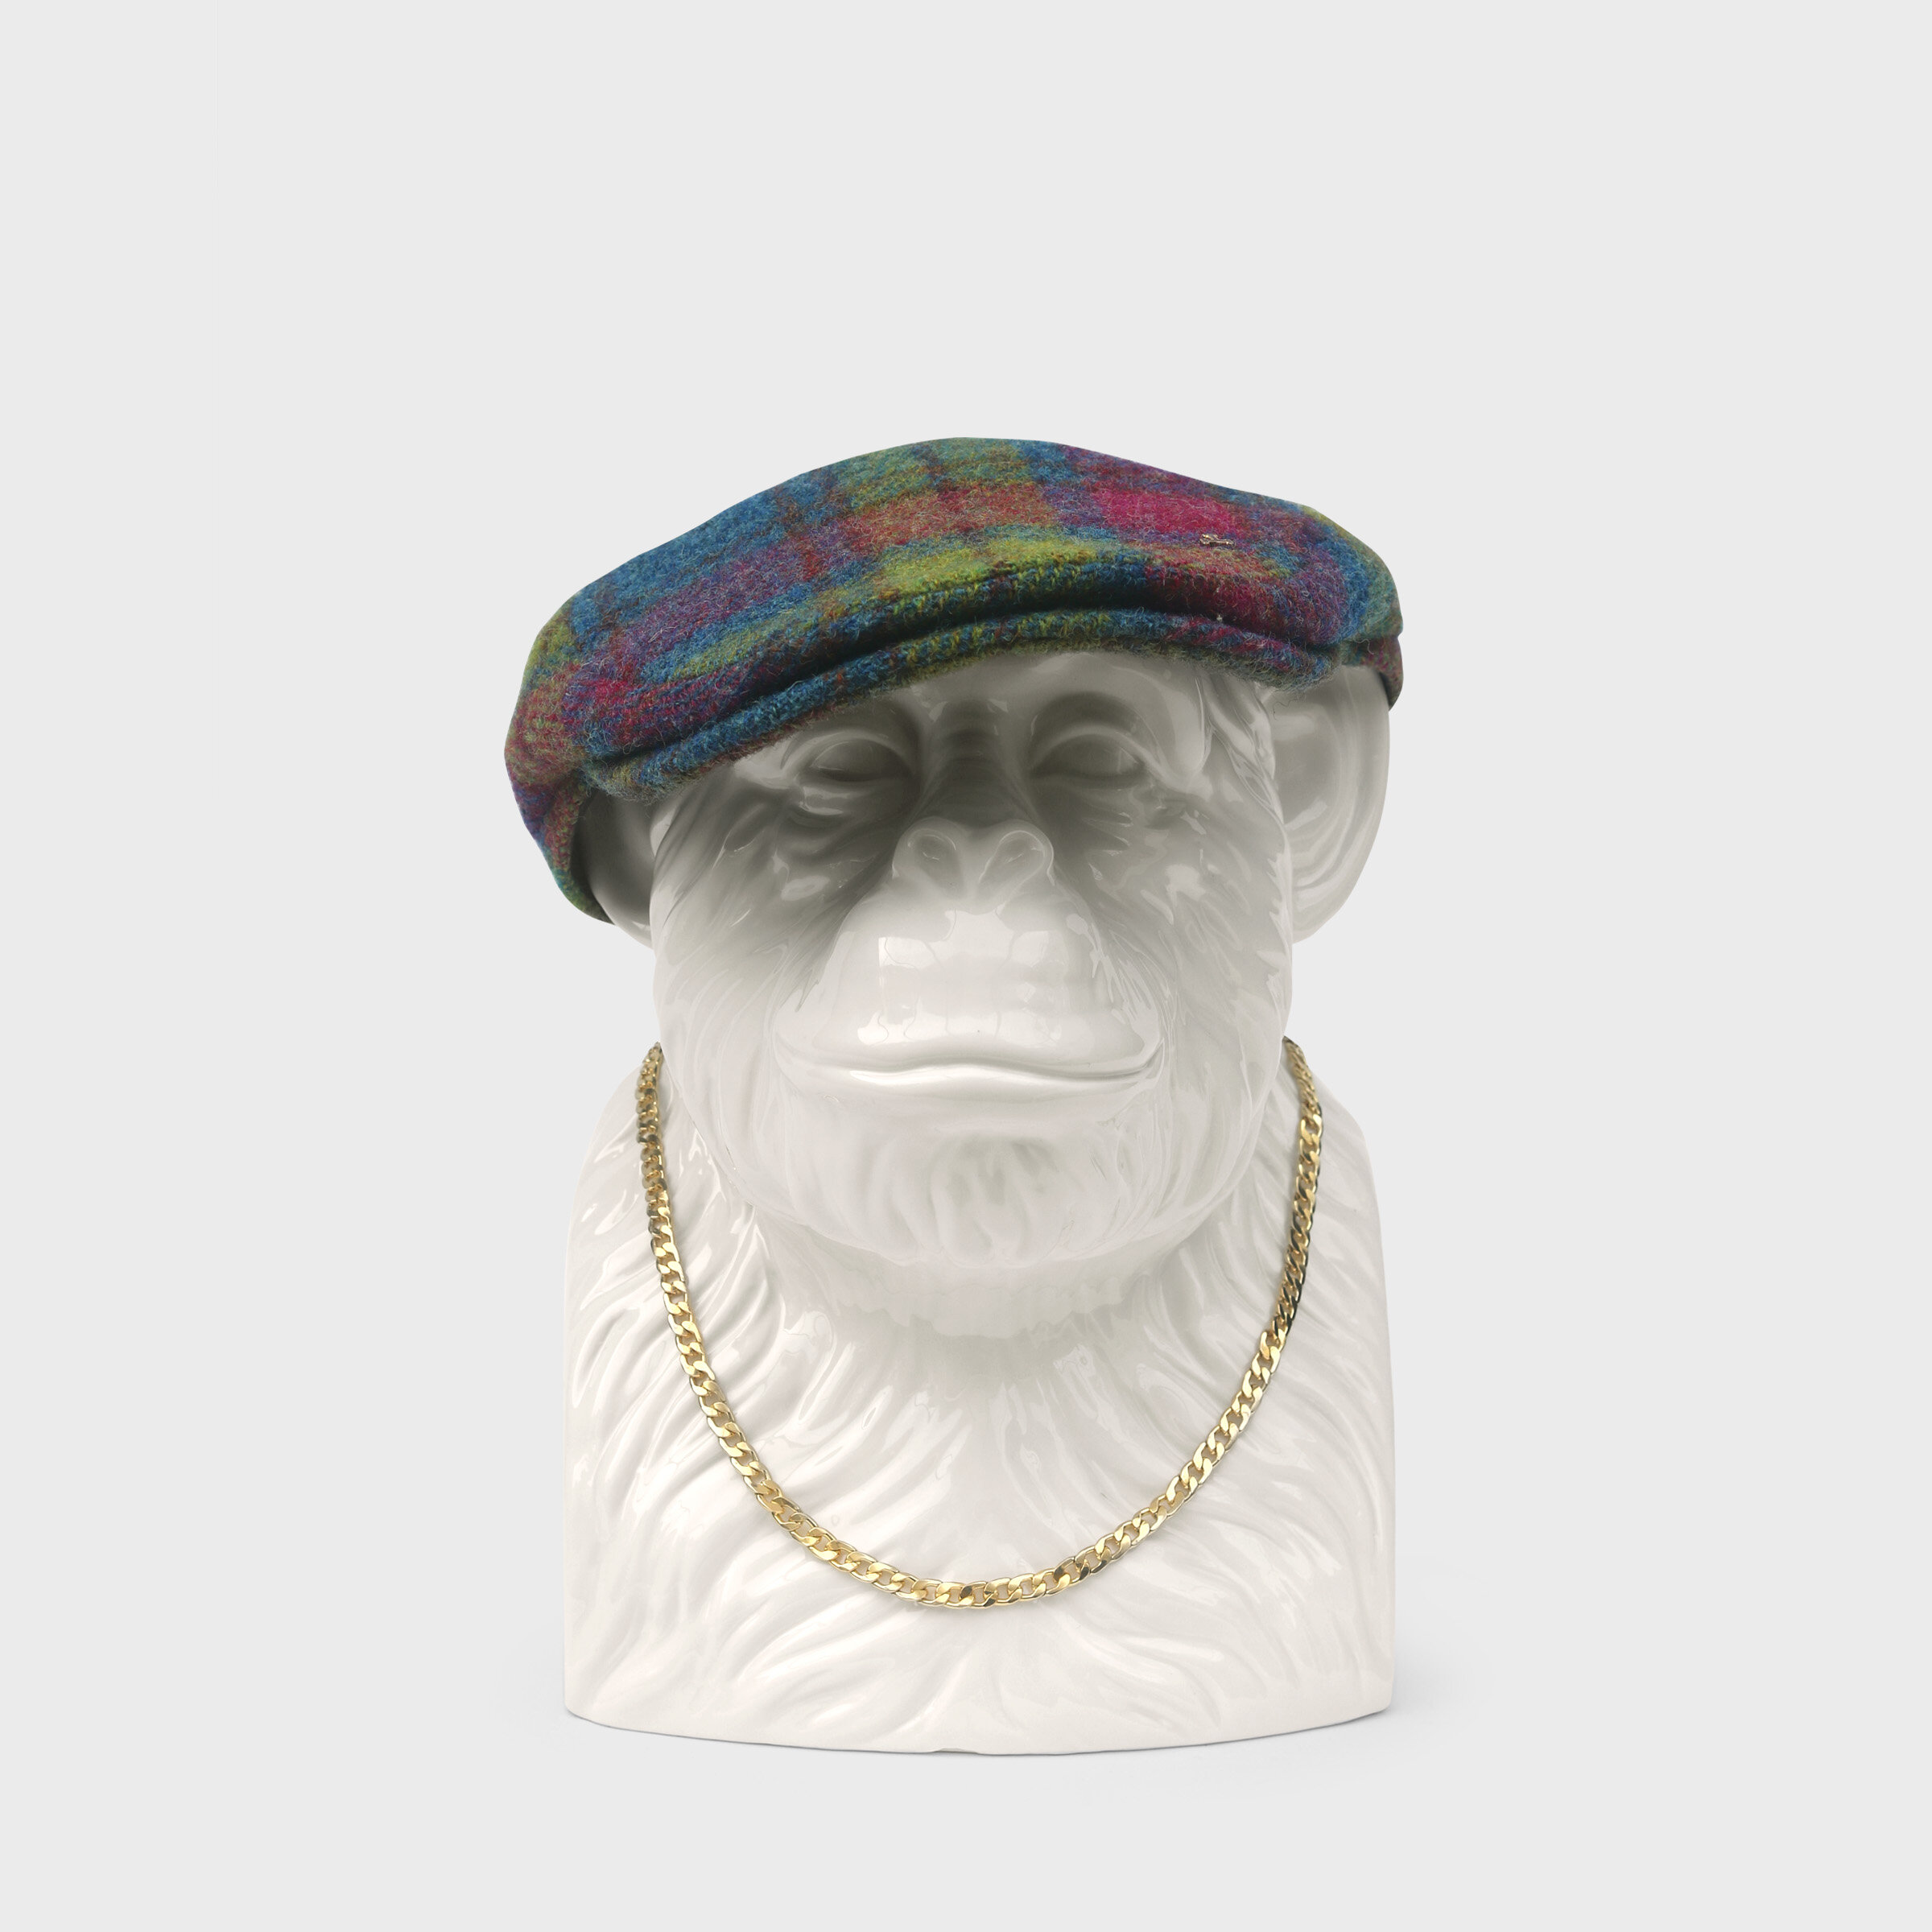 chimp with flat cap and necklace